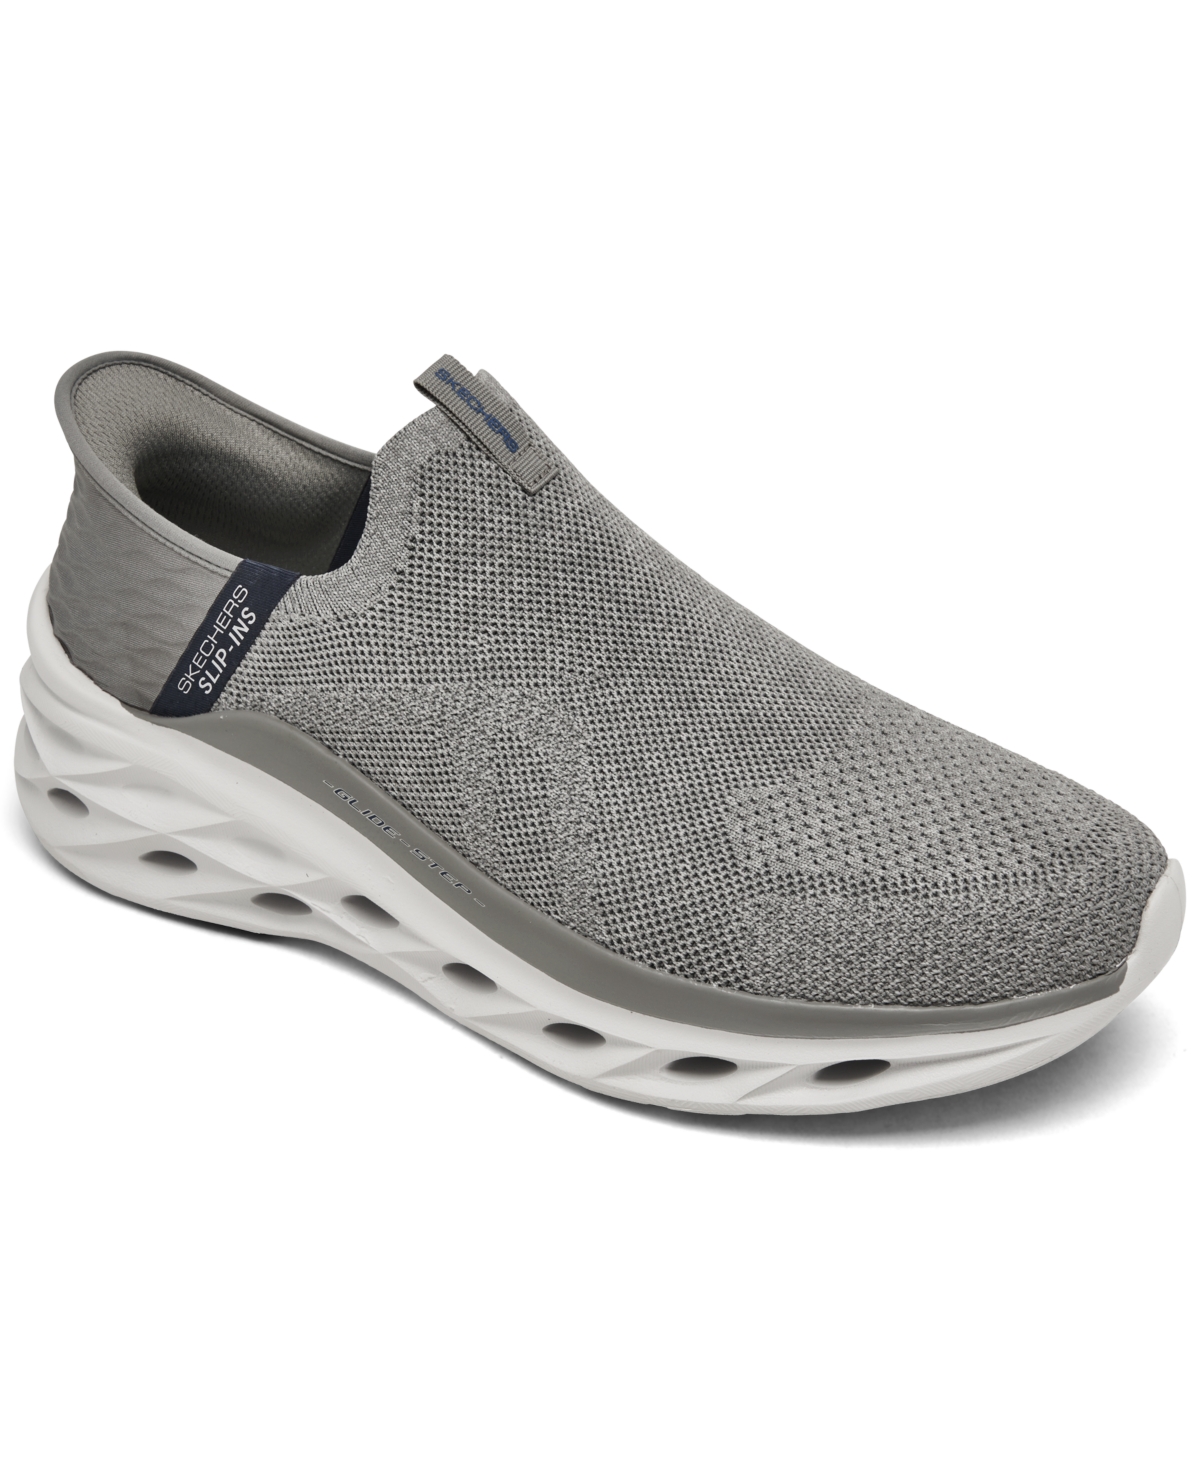 Men's Slip Ins: Glide Step - Swift Runner Casual Sneakers from Finish Line - Grey/navy